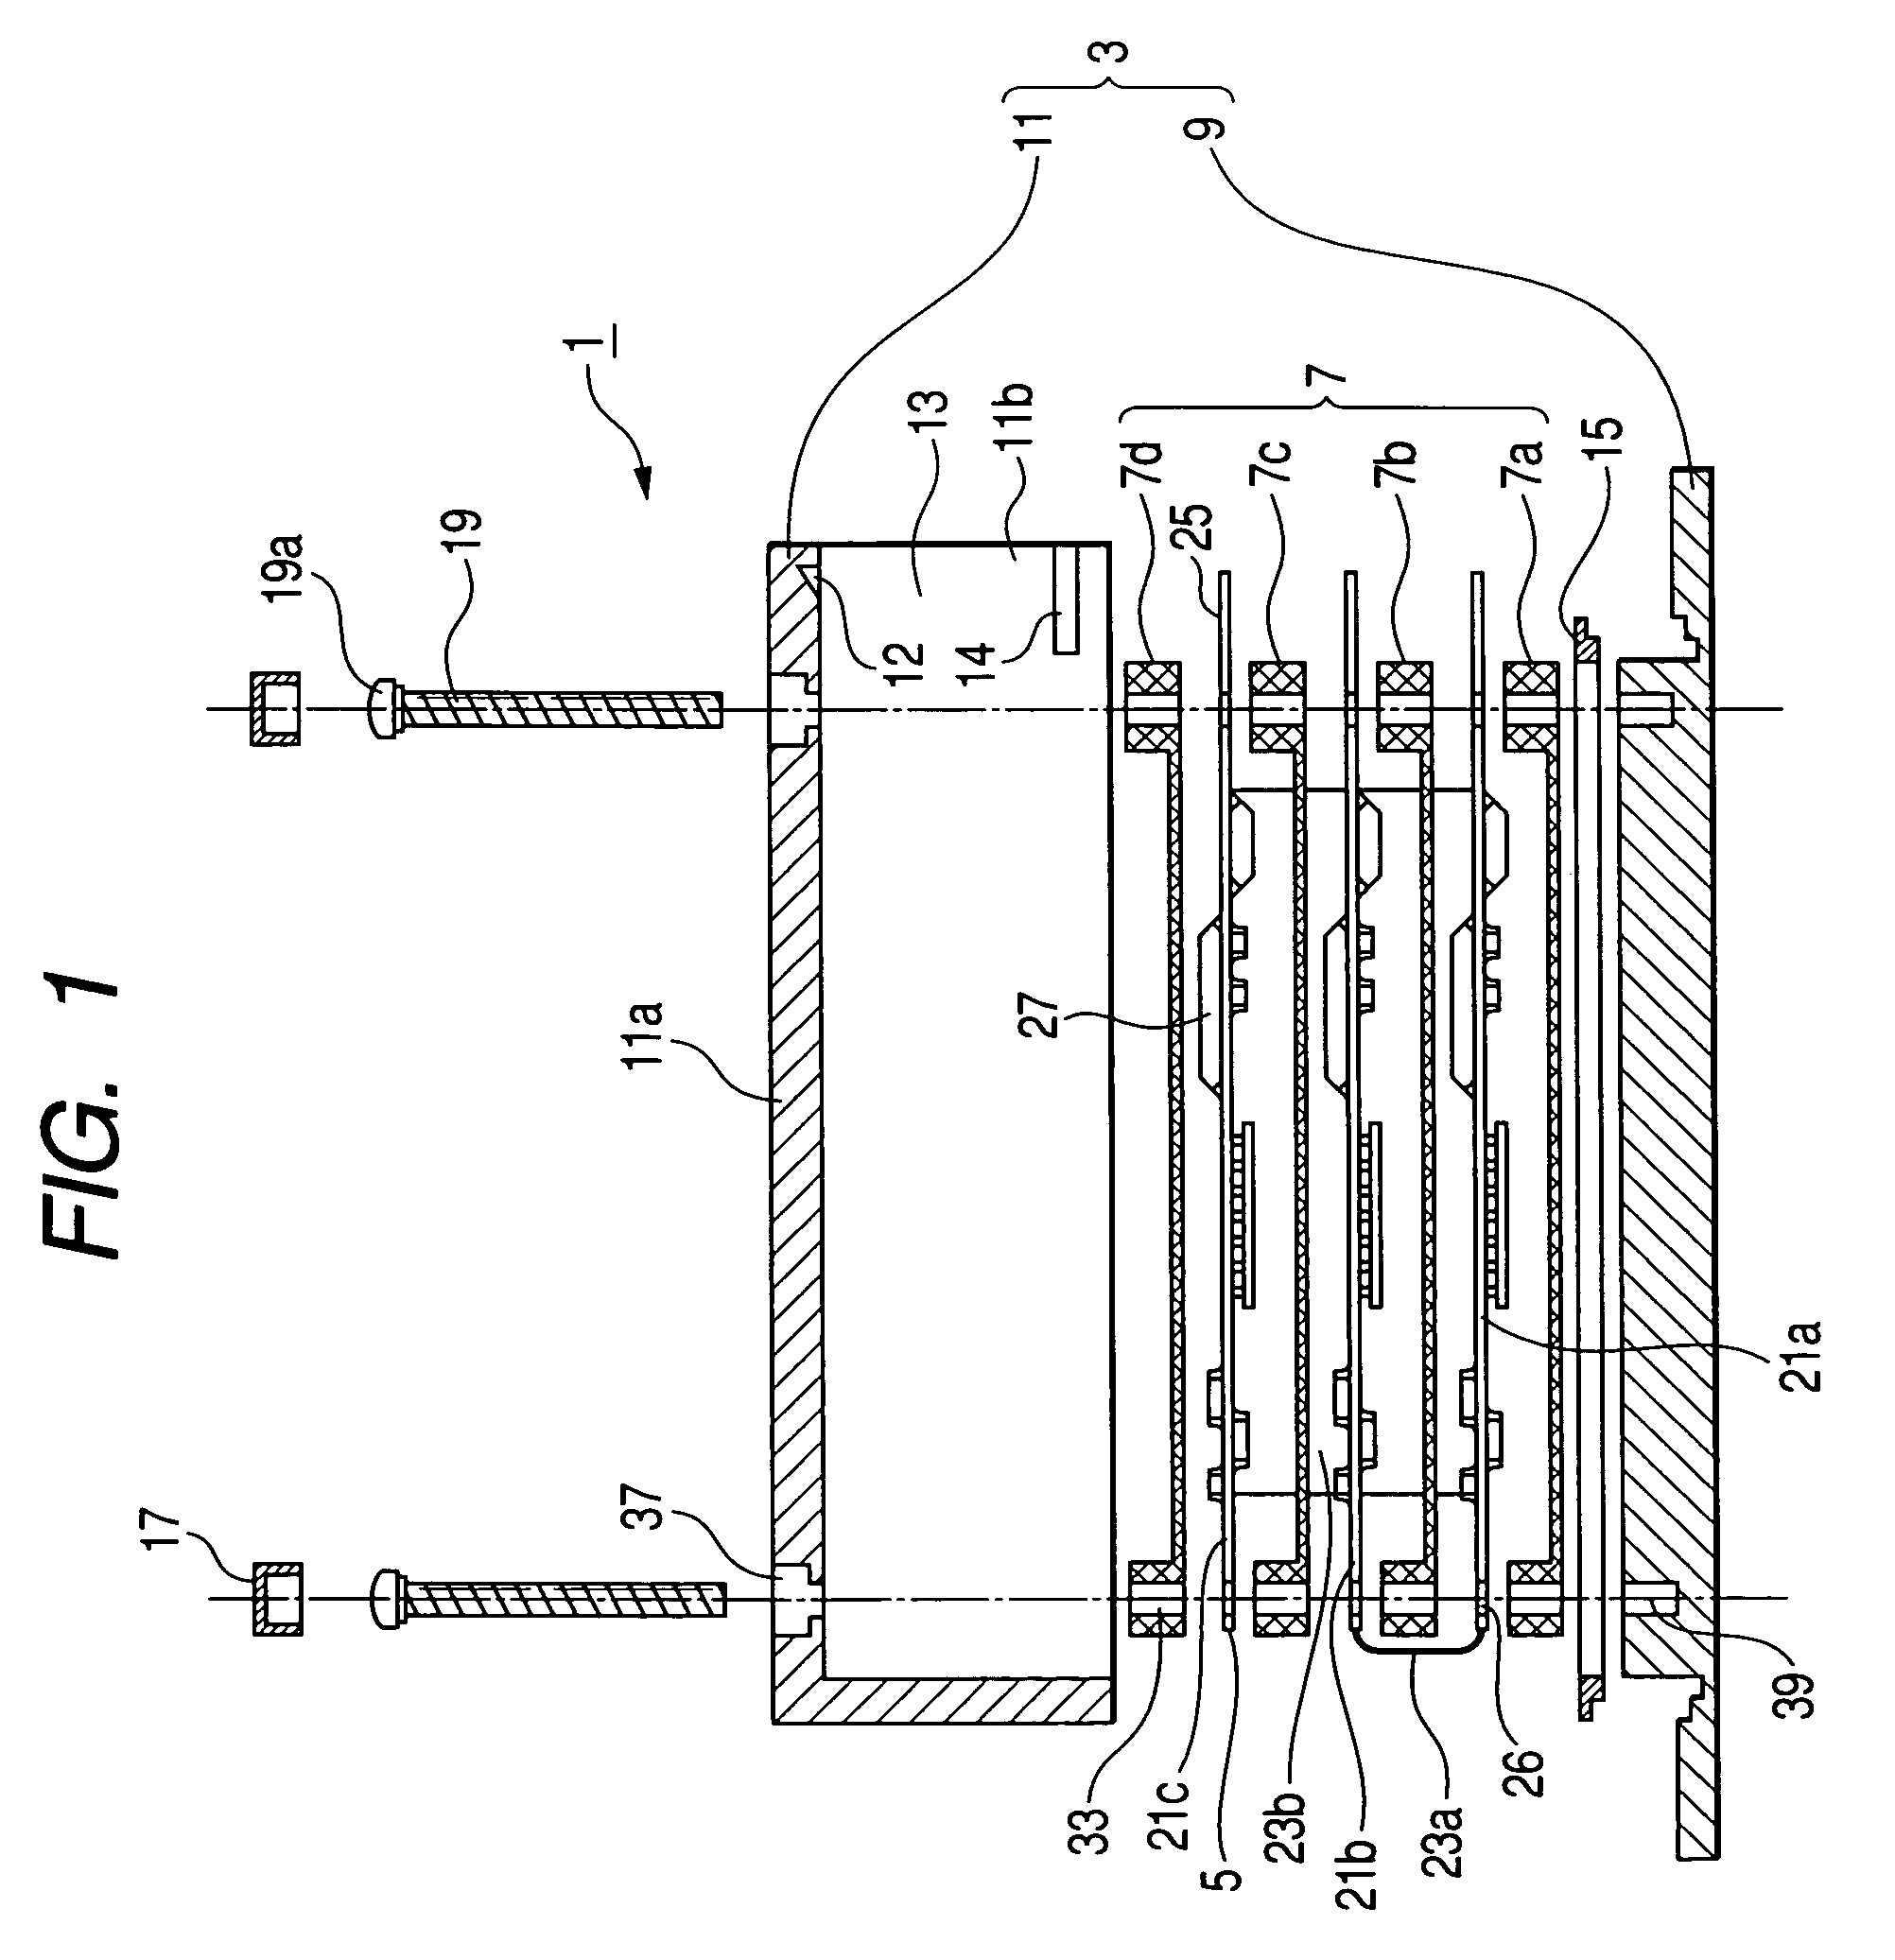 Multilayer electronic circuit device